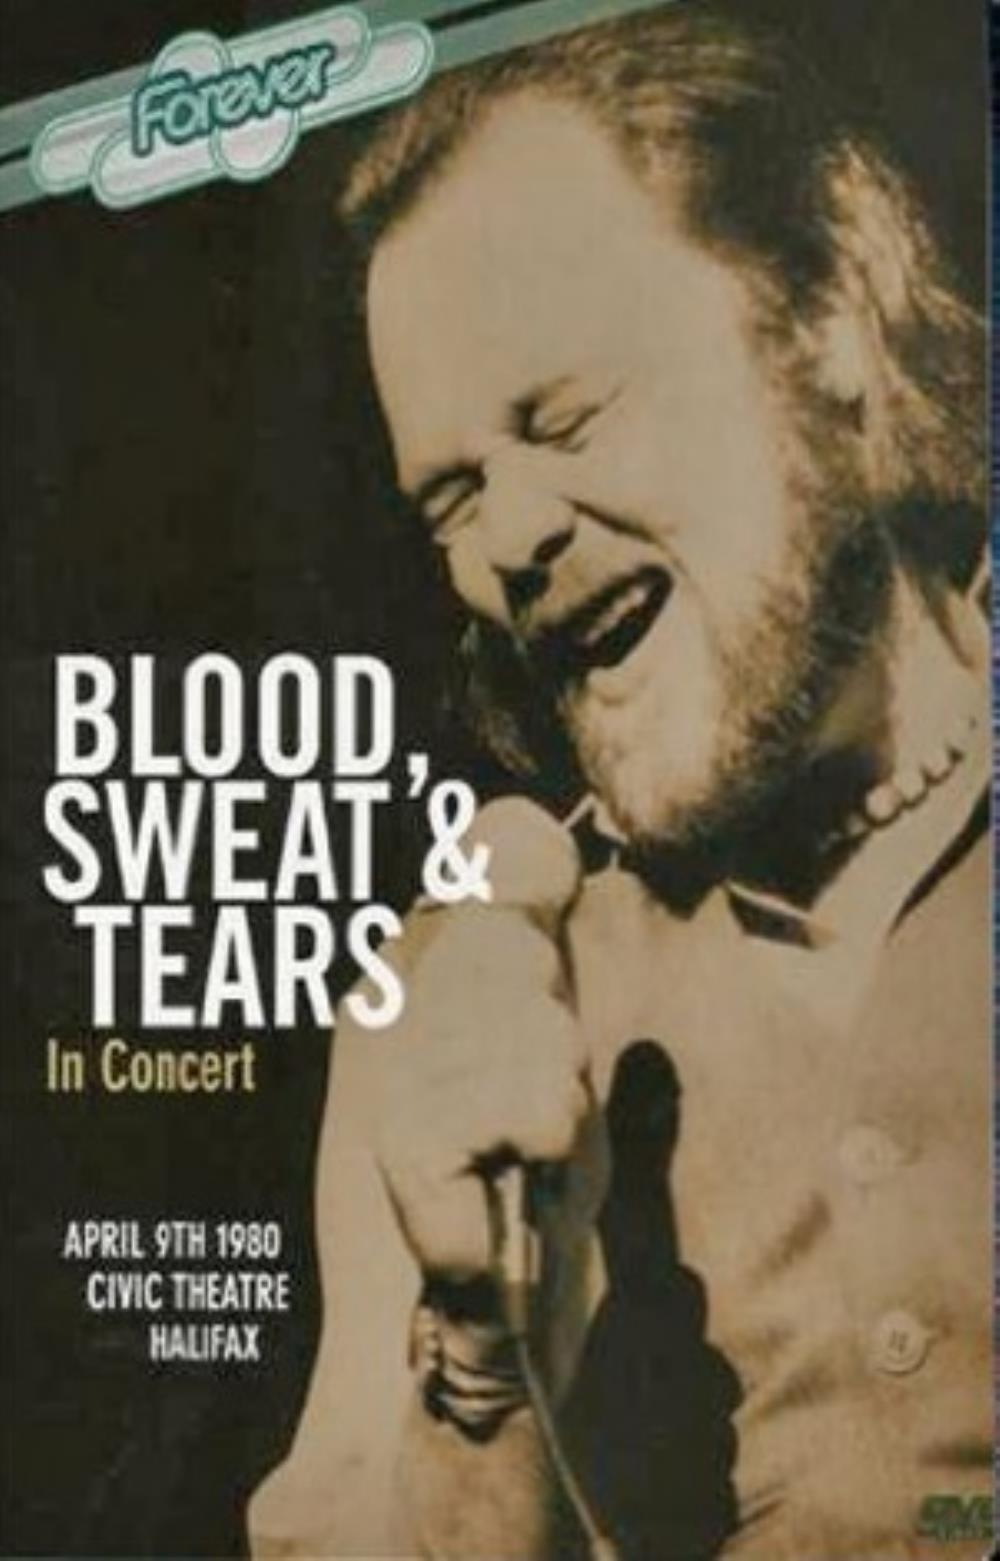 Blood Sweat & Tears In Concert album cover